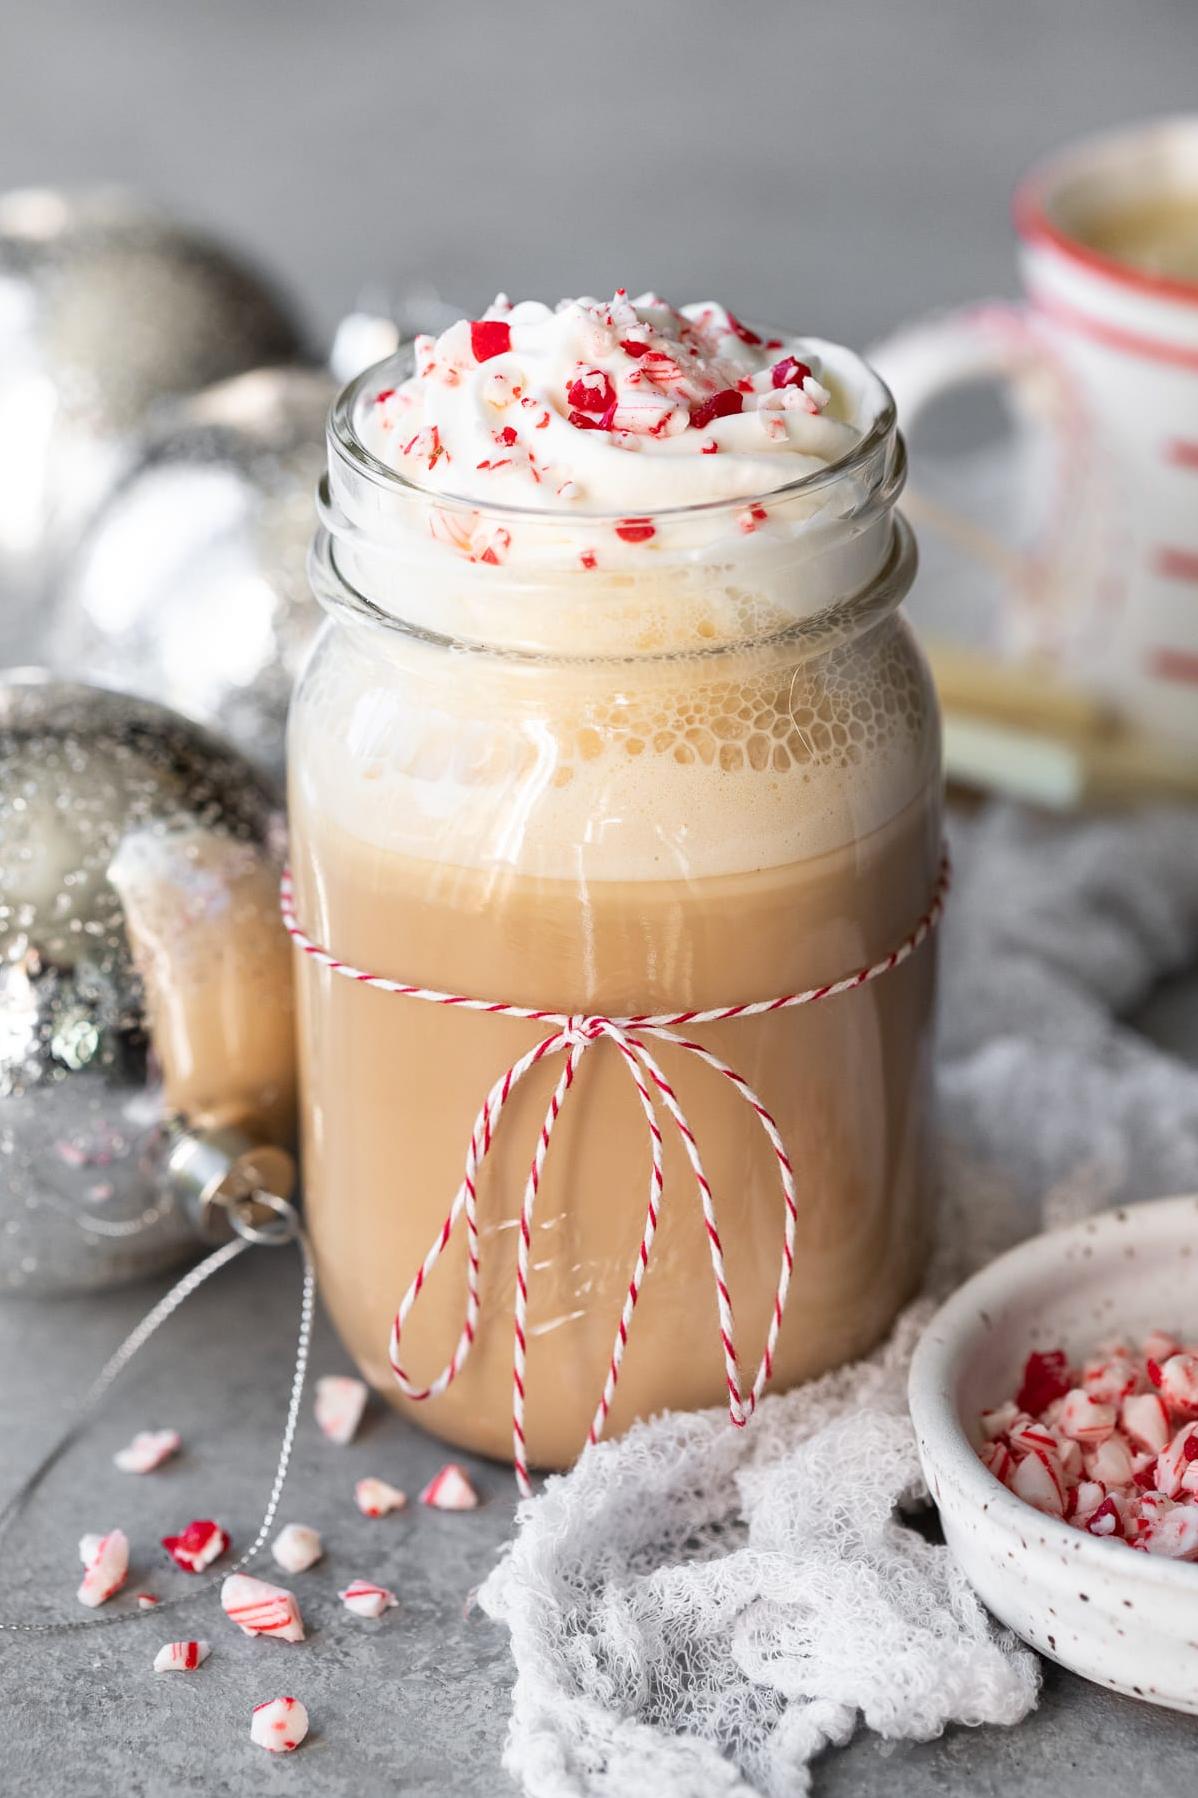 Indulge in White Chocolate Mocha with a Peppermint Twist